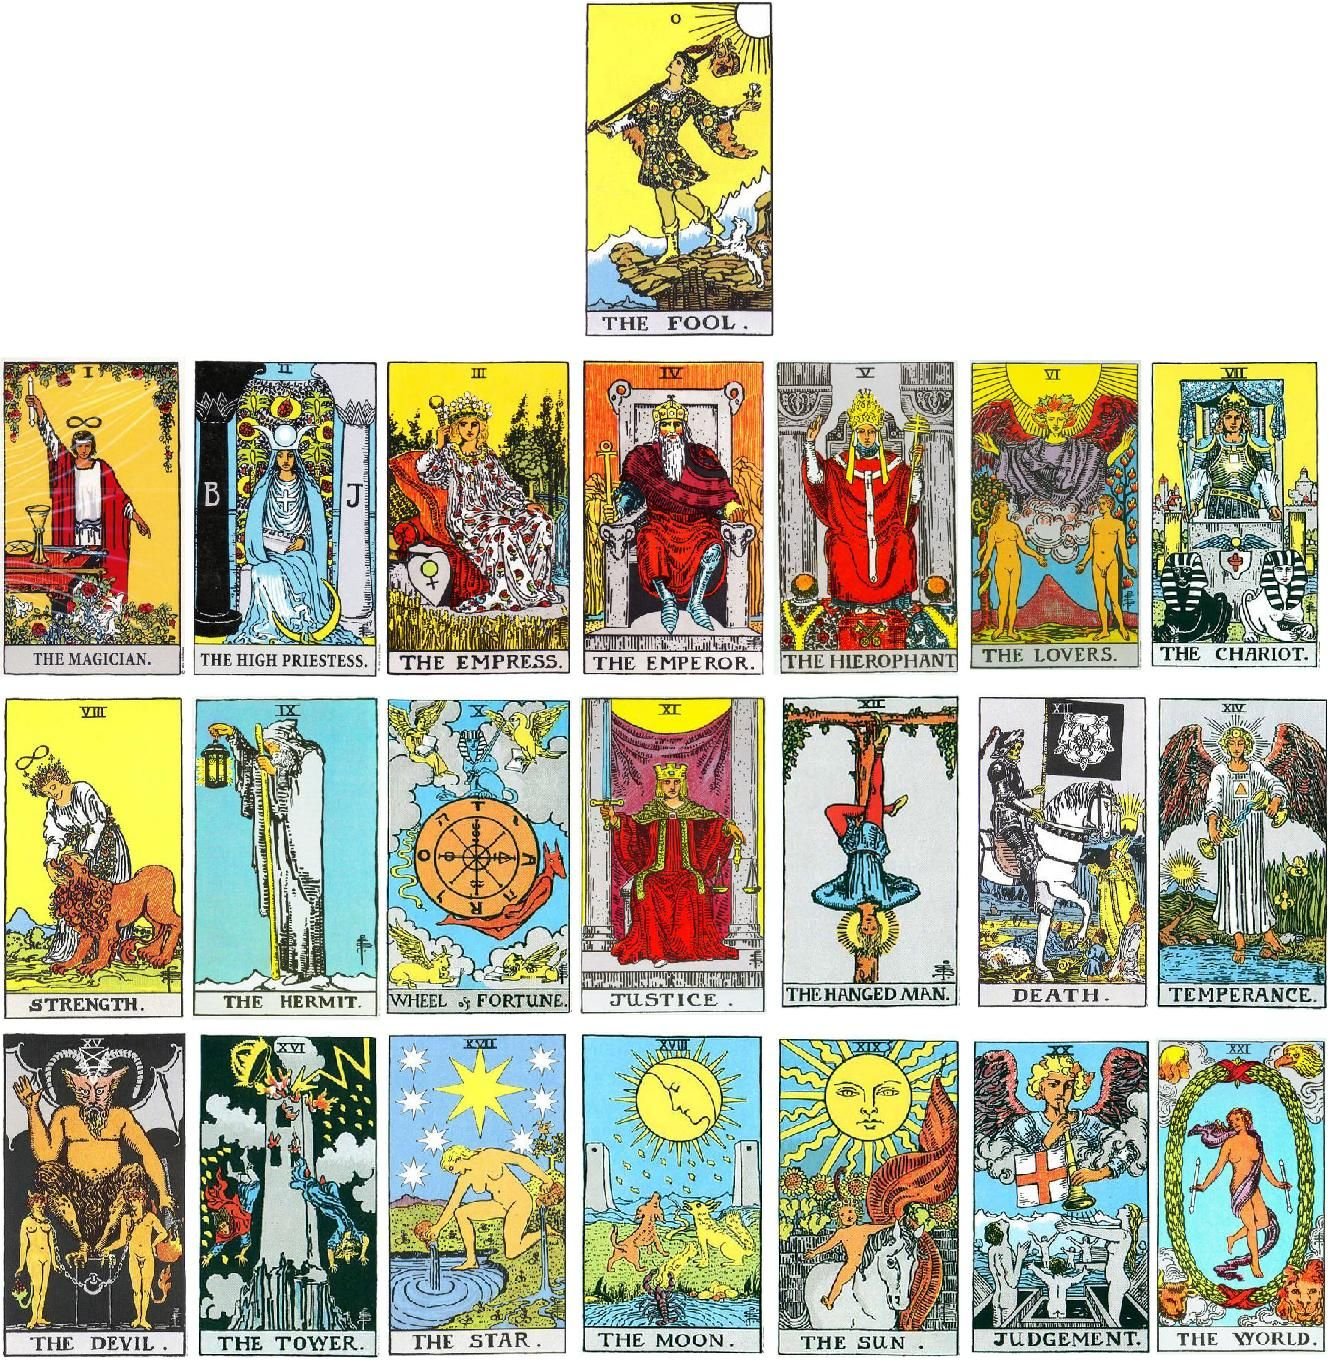 TAROT 101: Self-Paced Teacher-Supported Independent Study Video Course